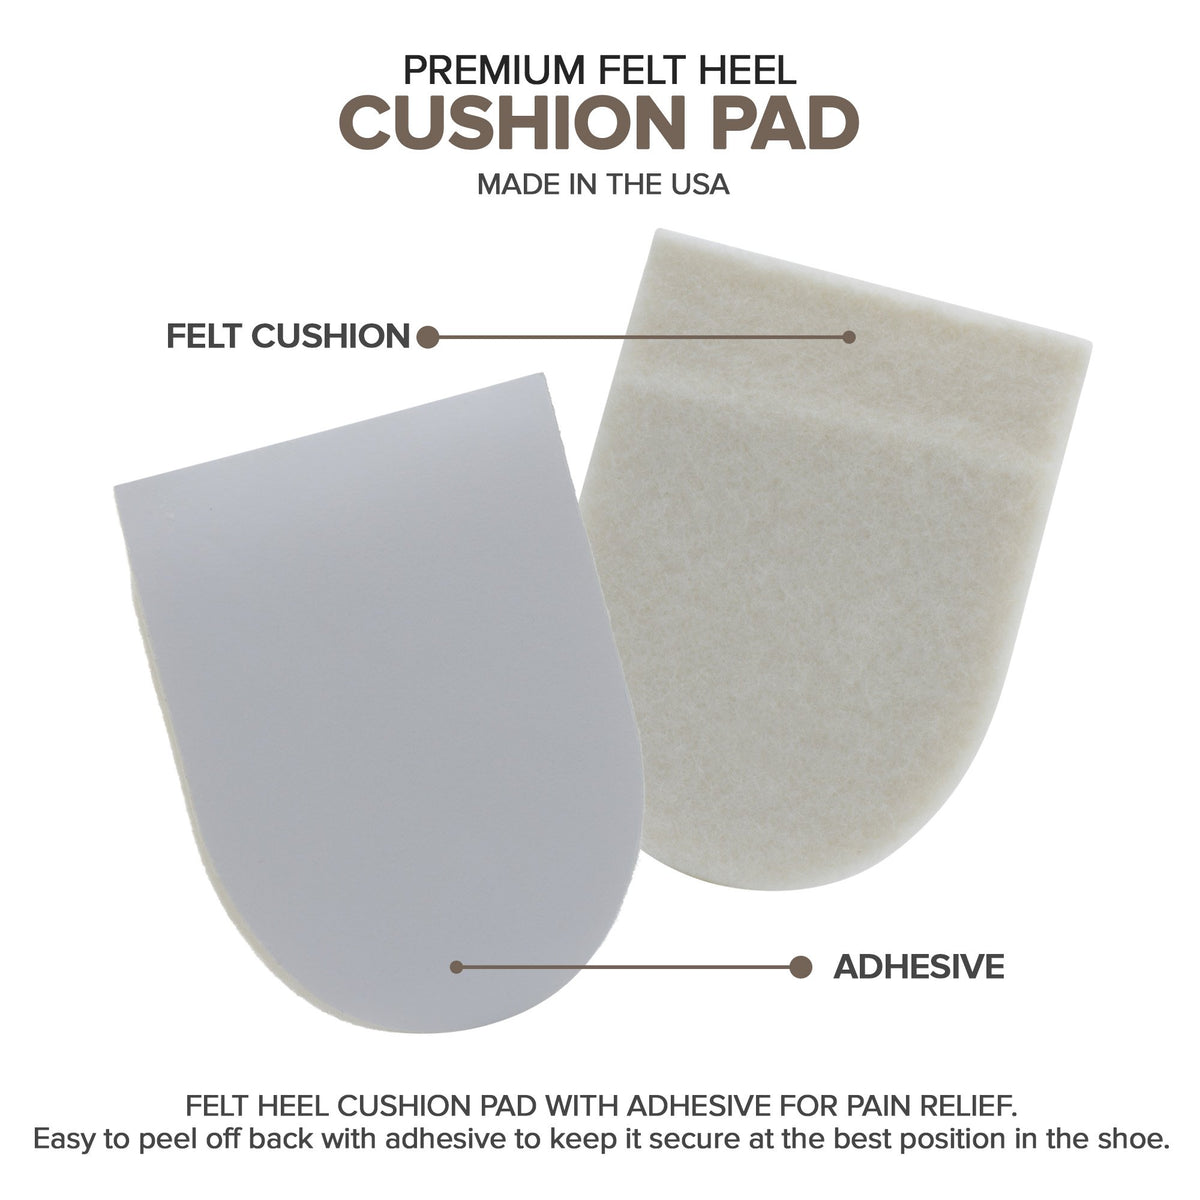 Felt Heel Cushion Pad 1/2" with Adhesive for Pain Relief - Mars Med Supply